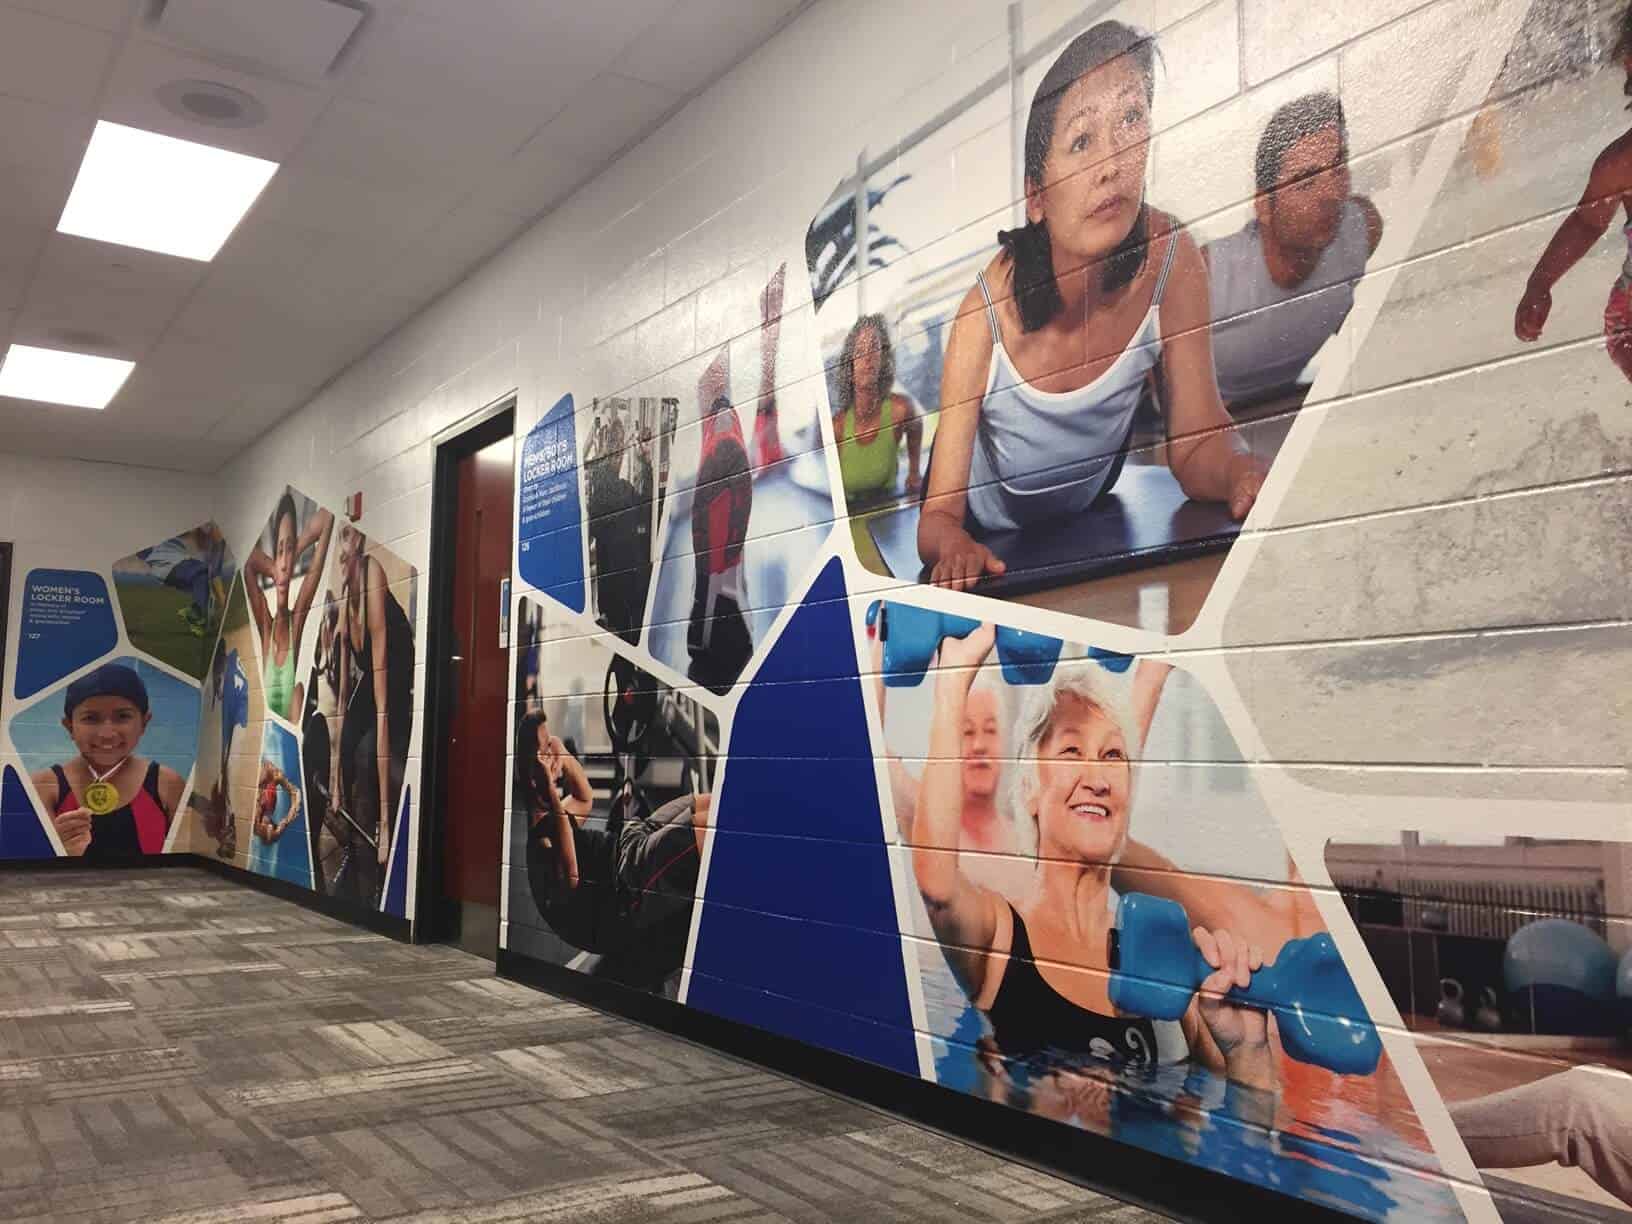 Wall mural, Sports theme mural, Fitness theme mural, Exercise theme mural by DeSigns, Inc.